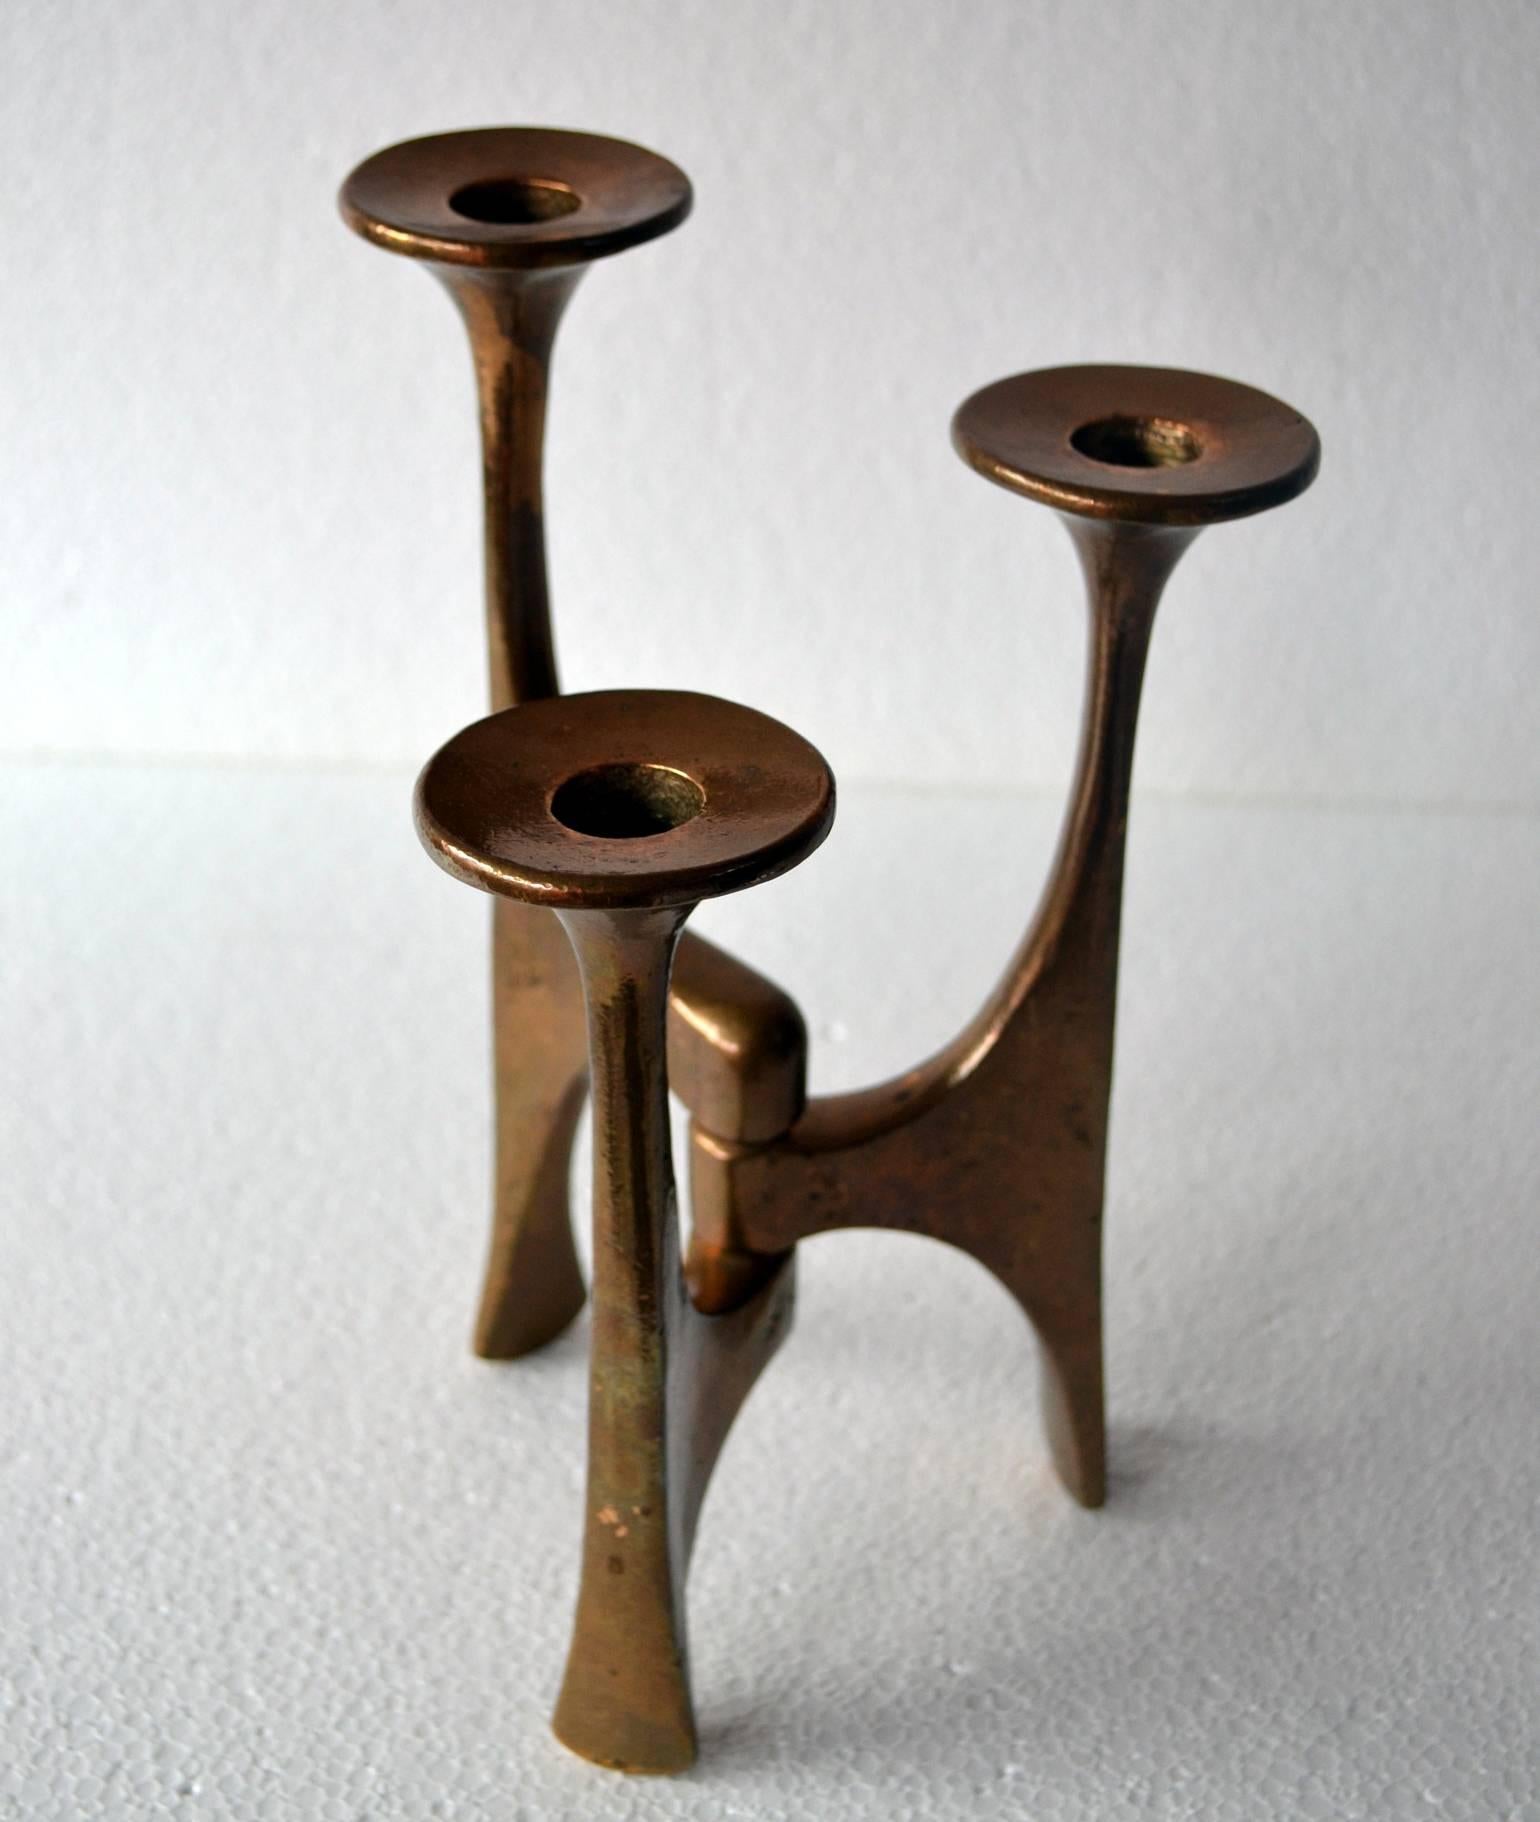 Bronze cast freeform candelabra with soft curves and lines. Three arms on descending heights hold regular size candles.